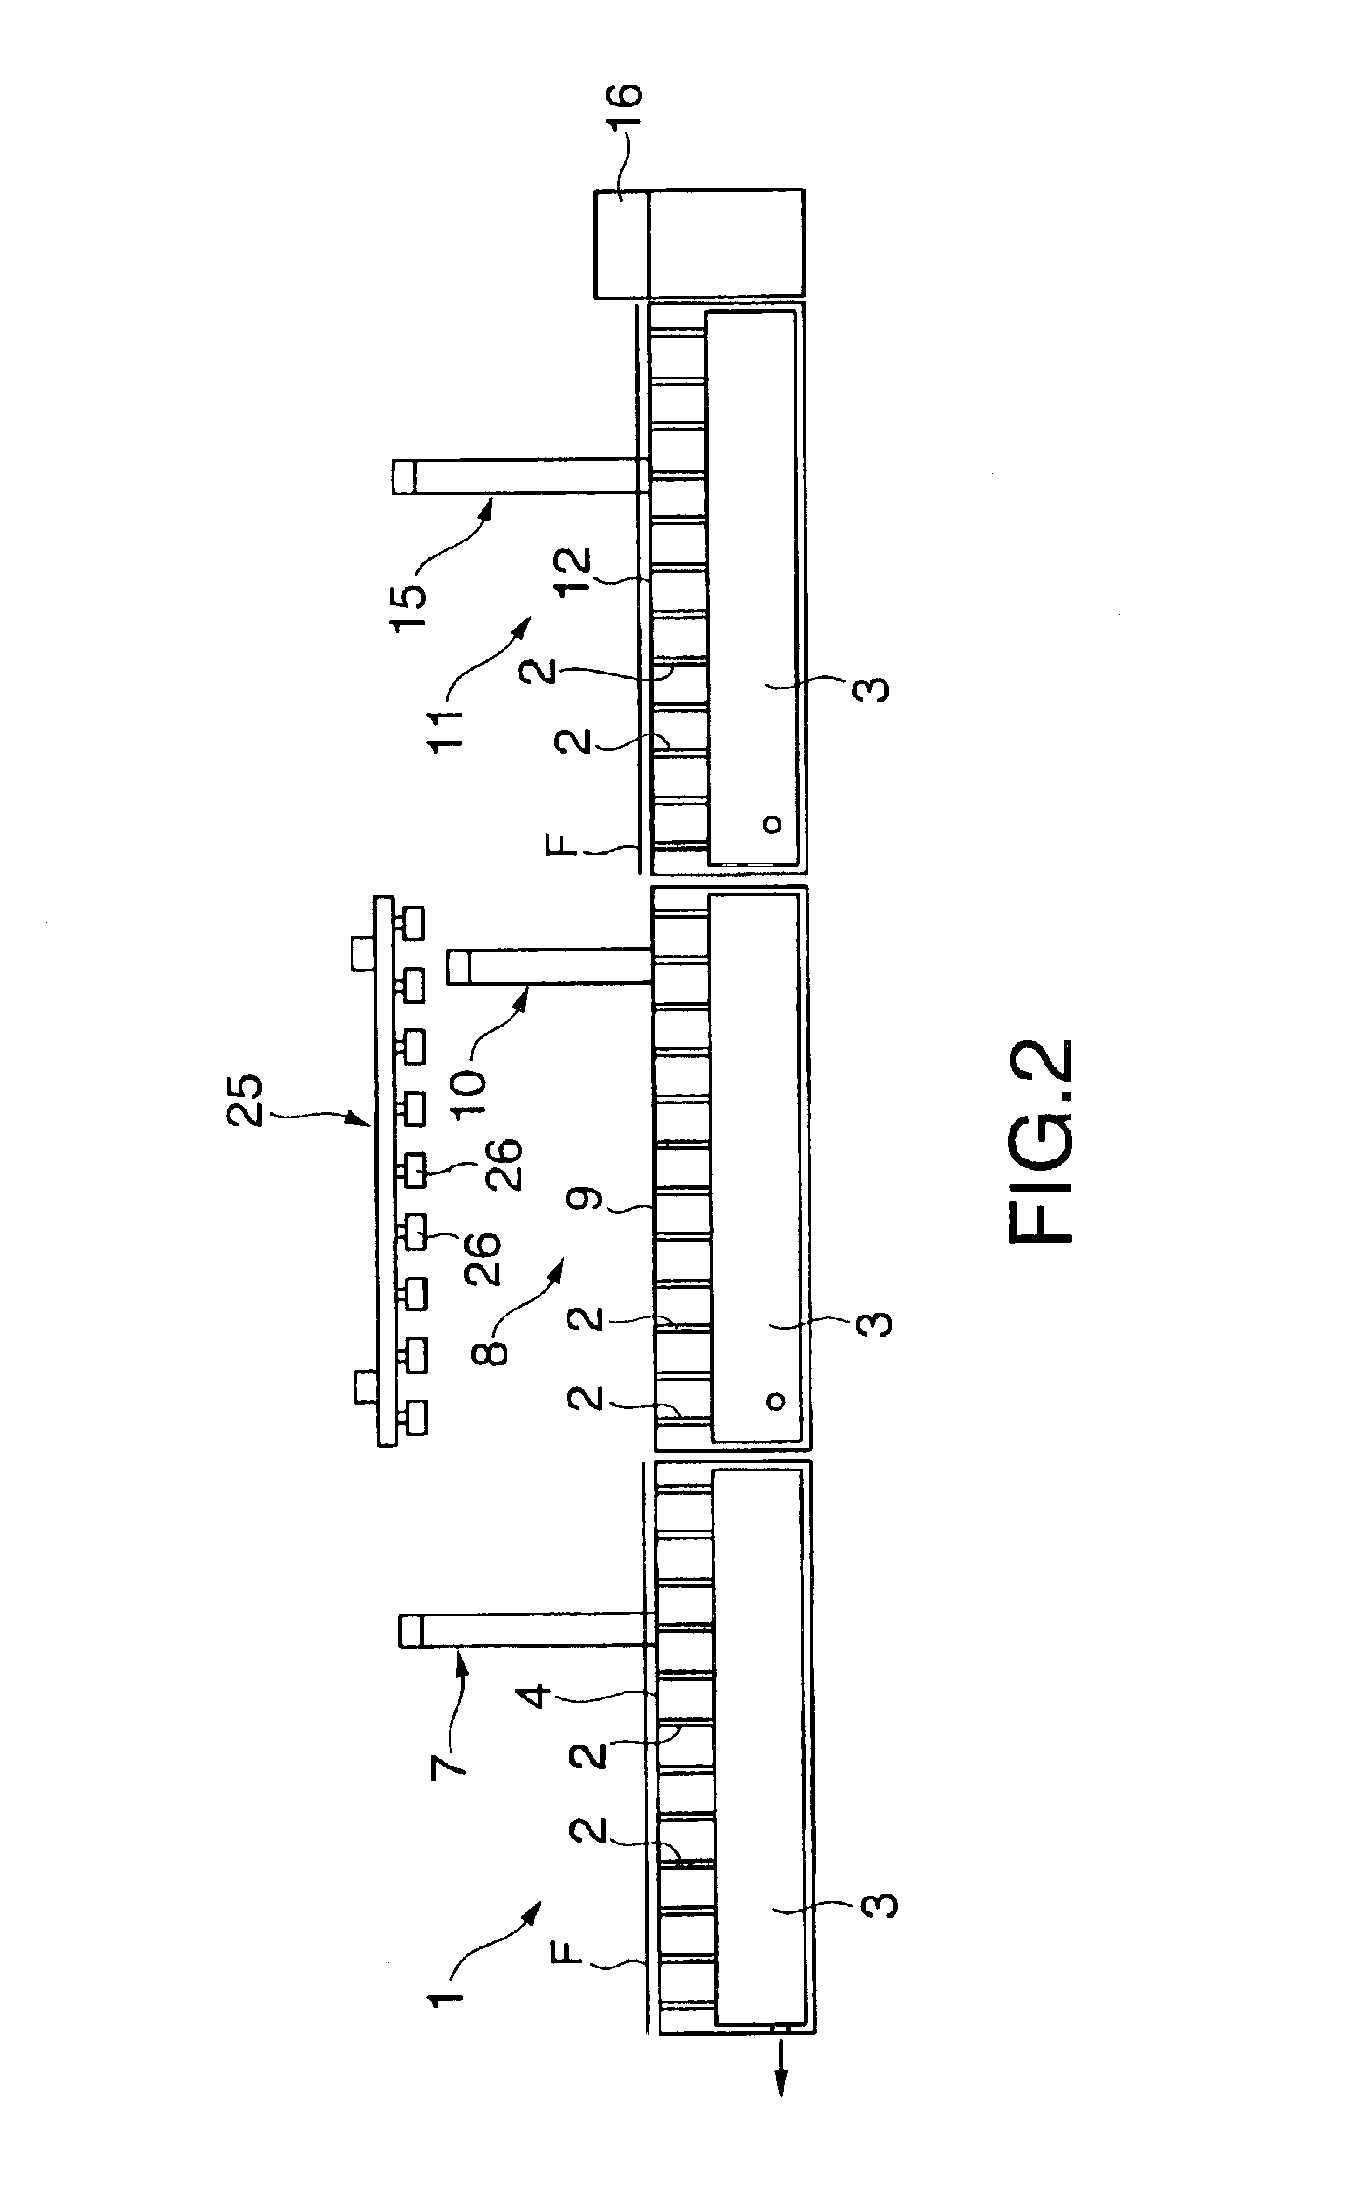 Automatic prepreg laminating method and apparatus for carrying out the same